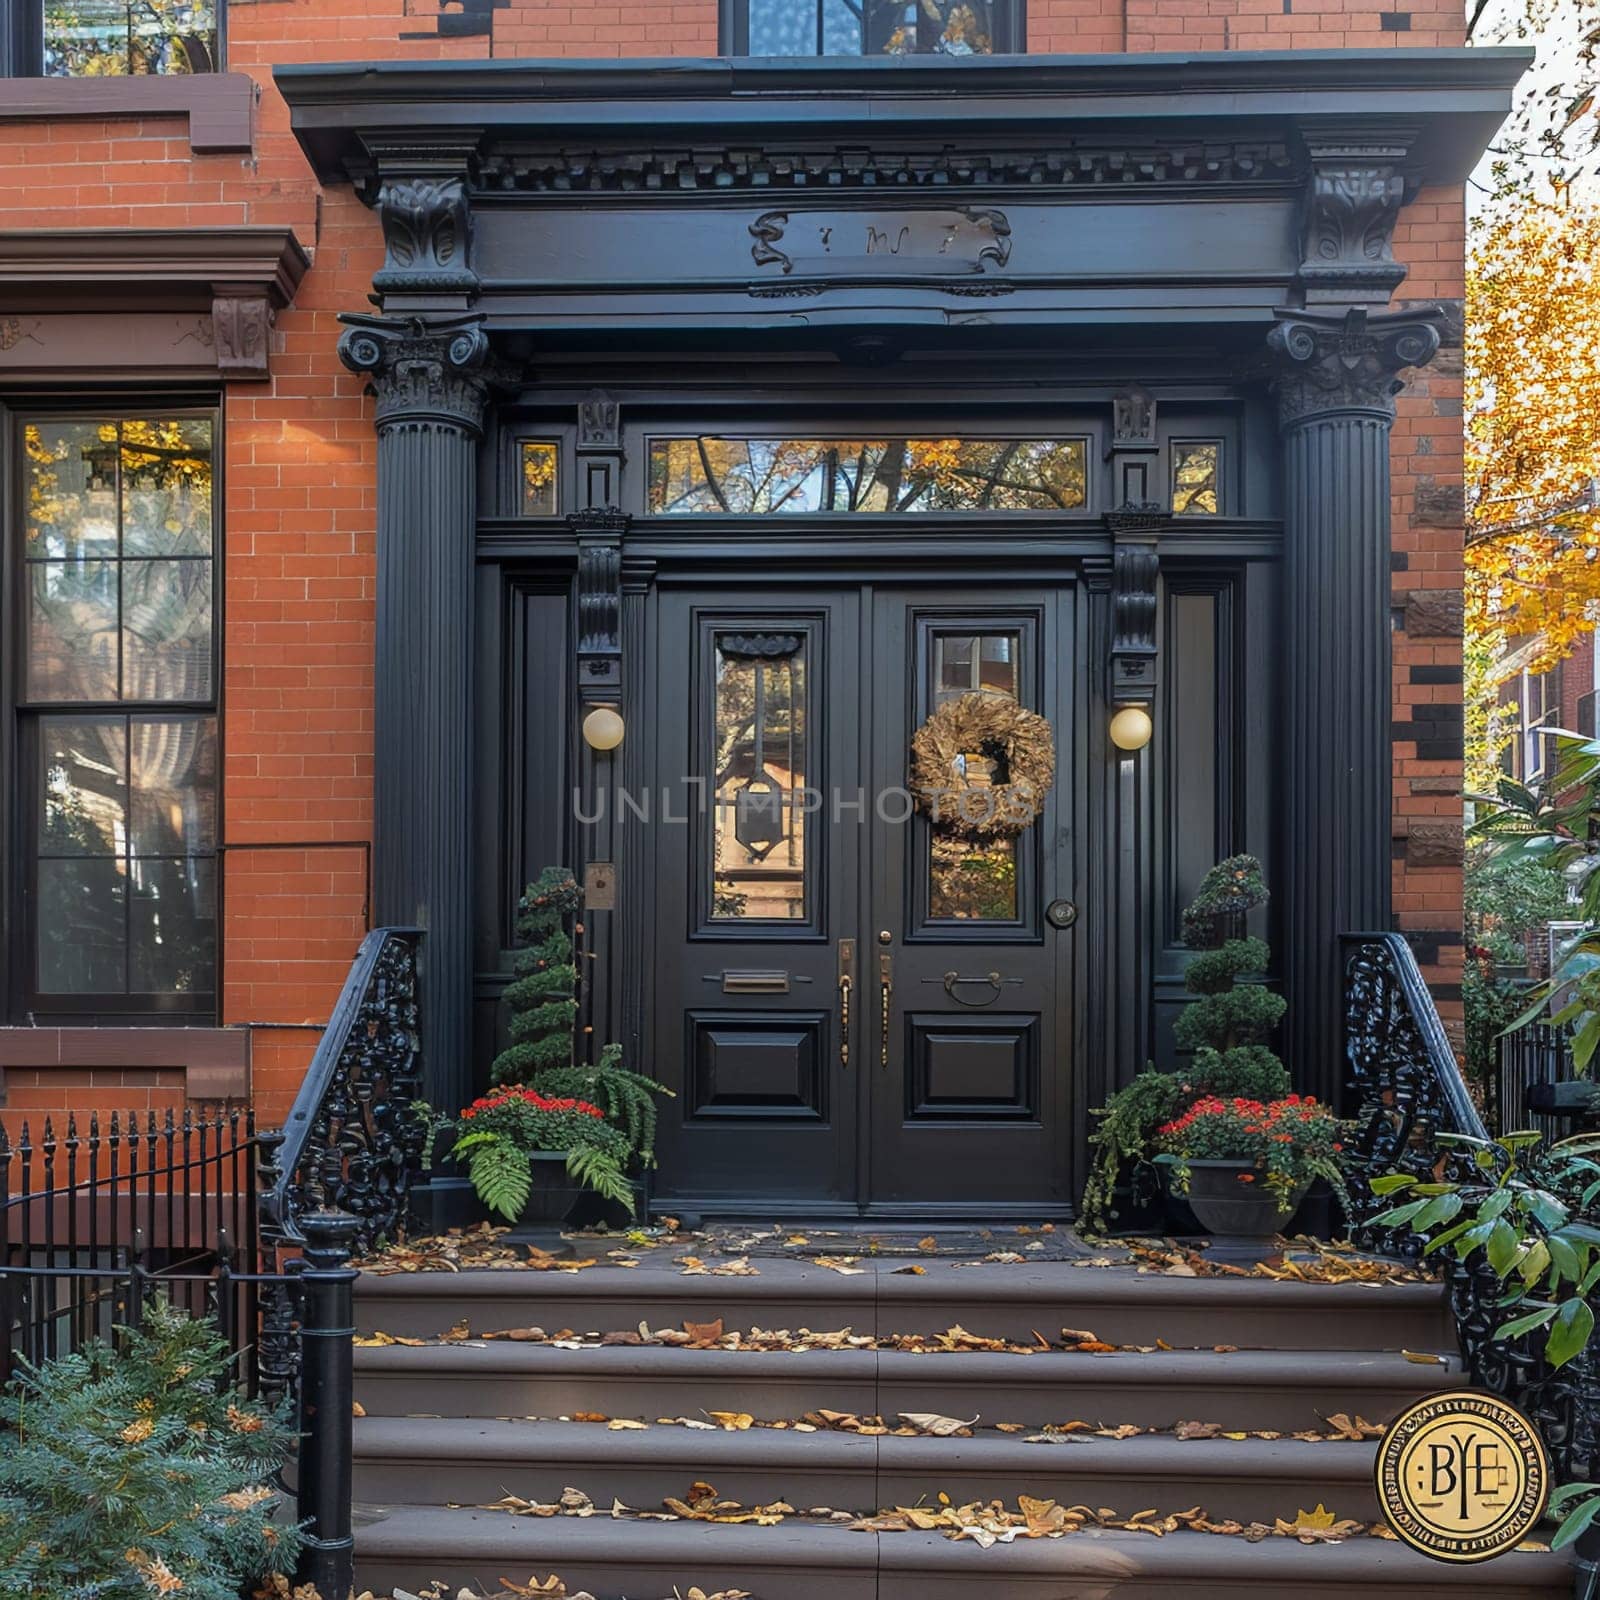 Classic Brownstones with Historical Charm and Iron Railings, iconic urban living.